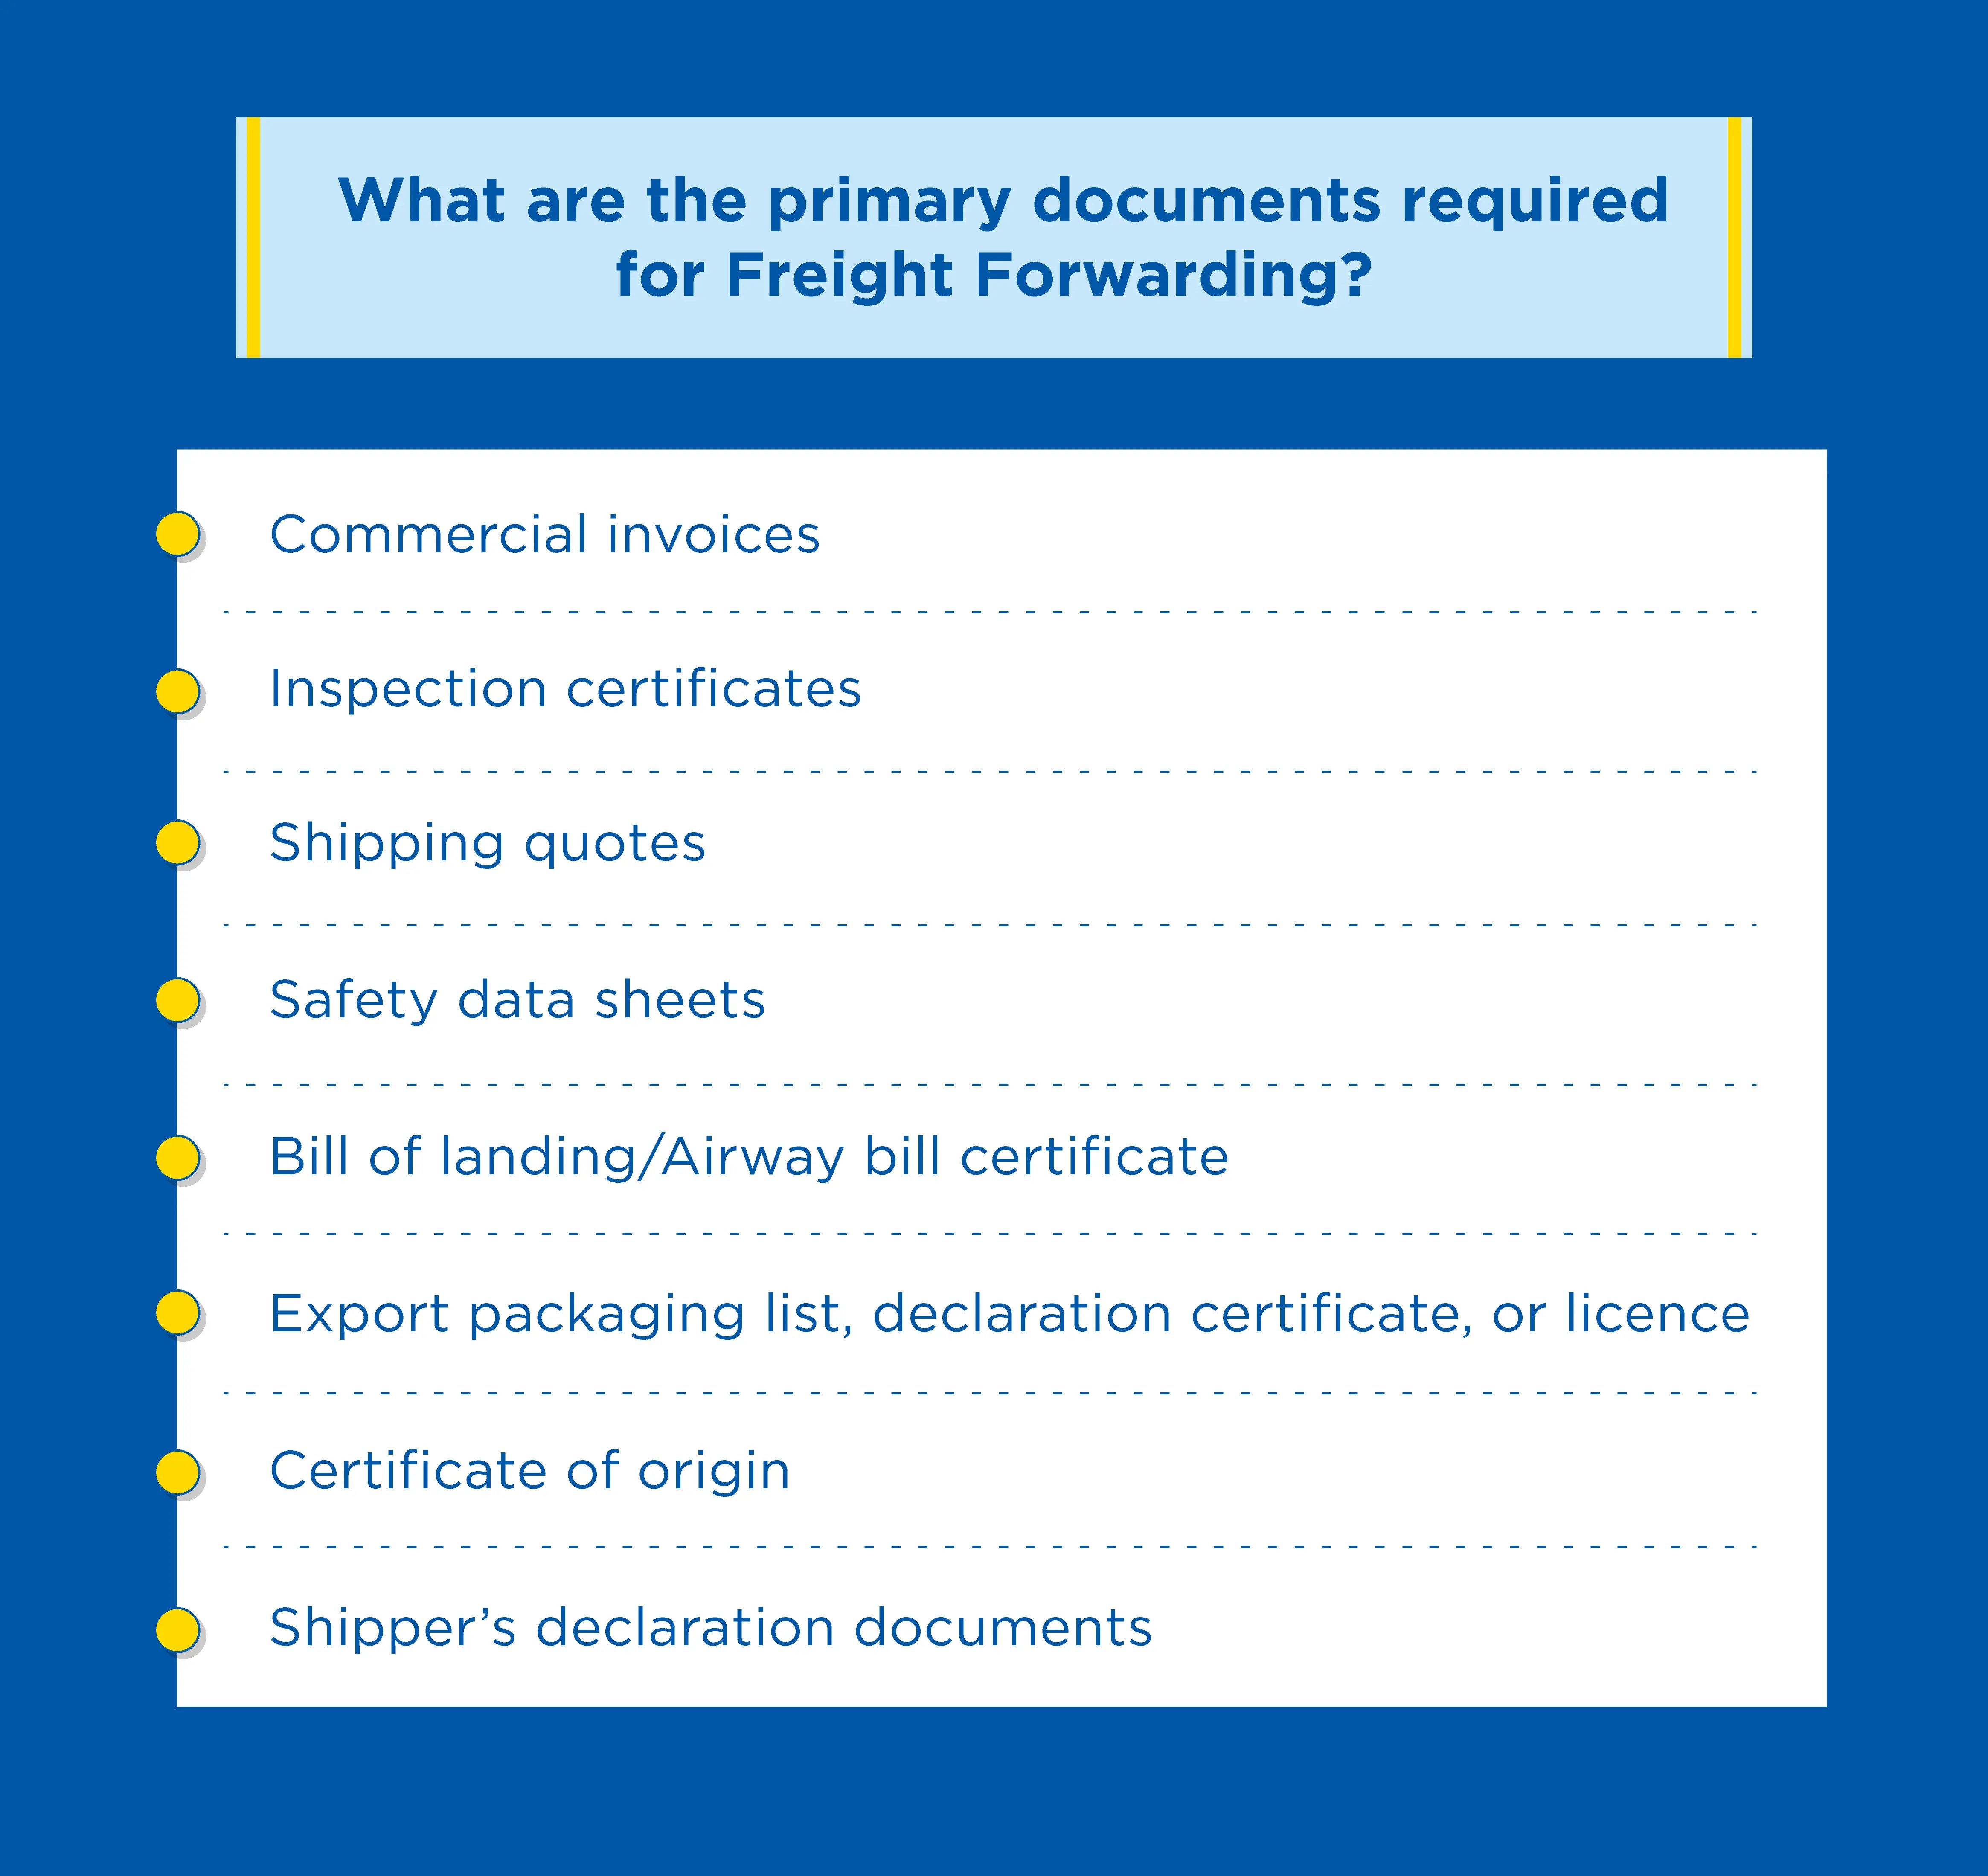 What-are-the-primary-documents-required-for-freight-forwarding